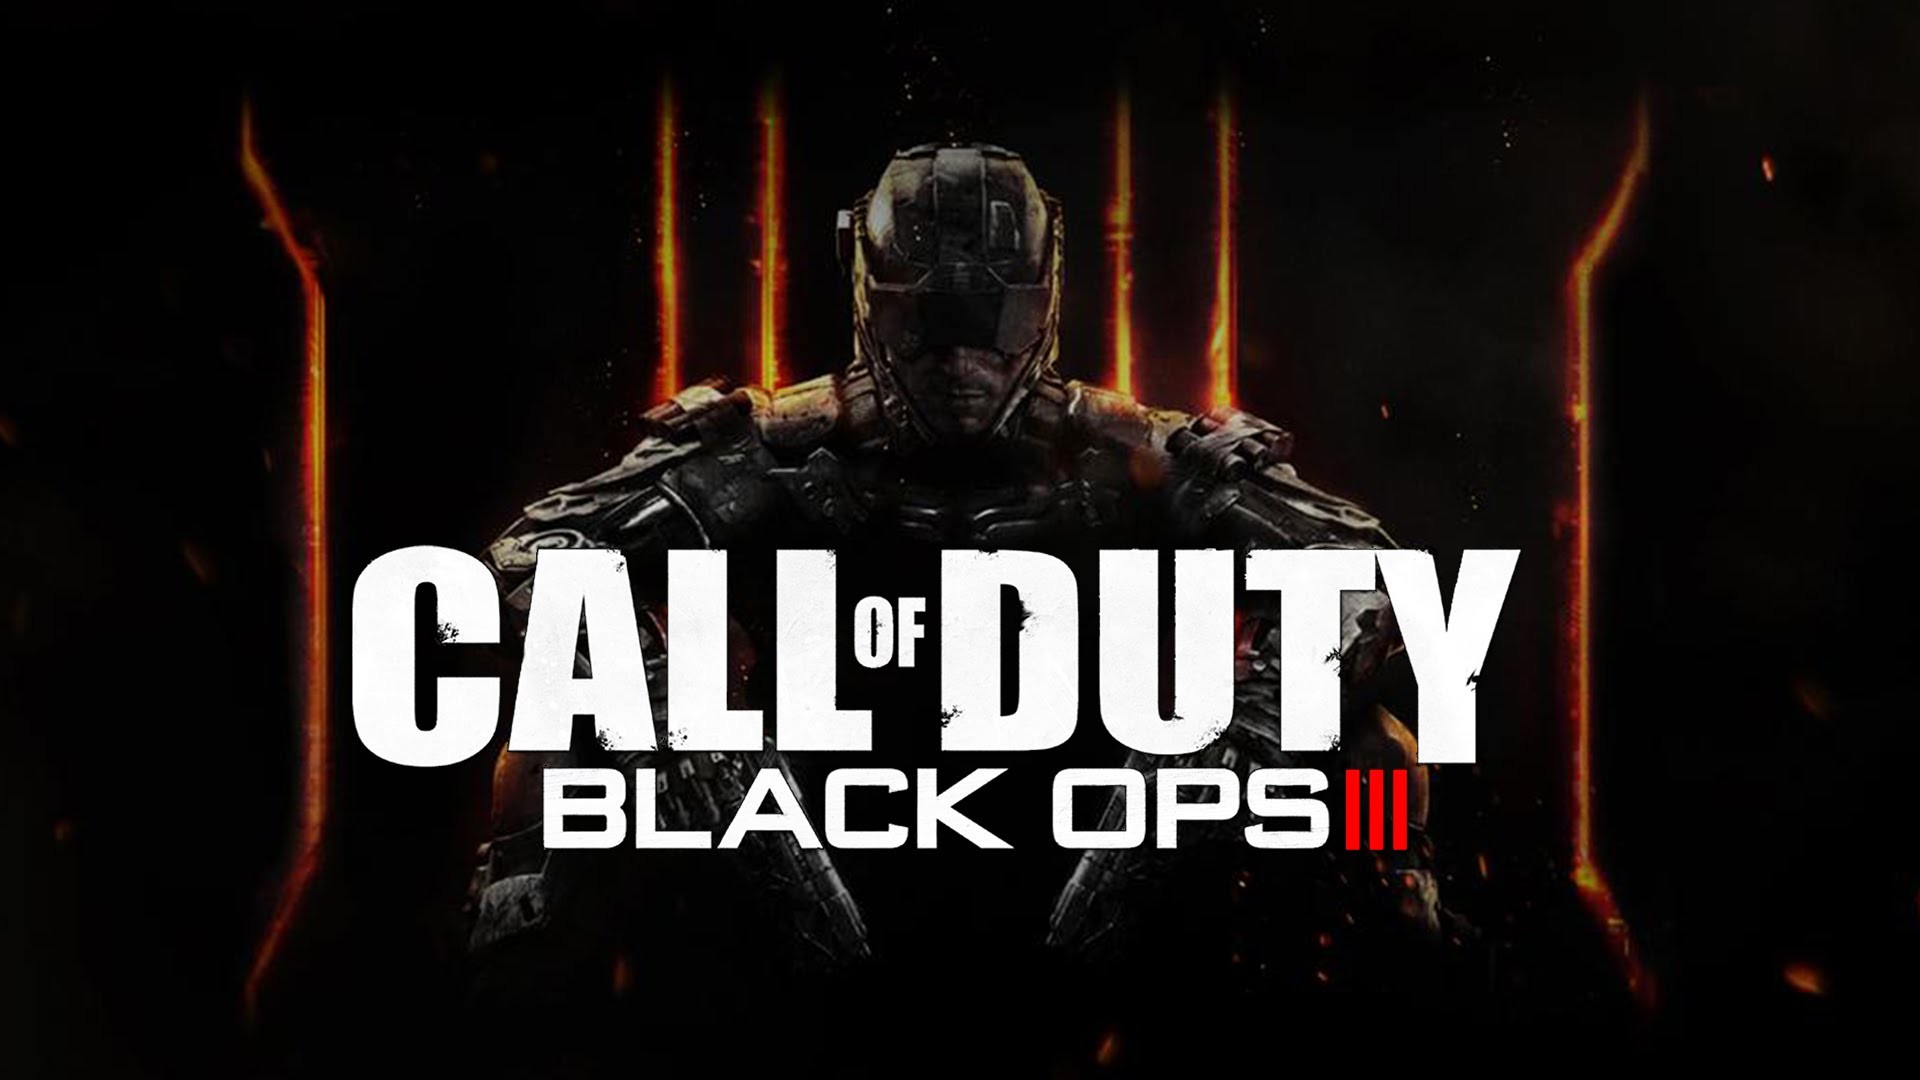 PC Gaming, Video Games, Call Of Duty: Black Ops III Wallpaper